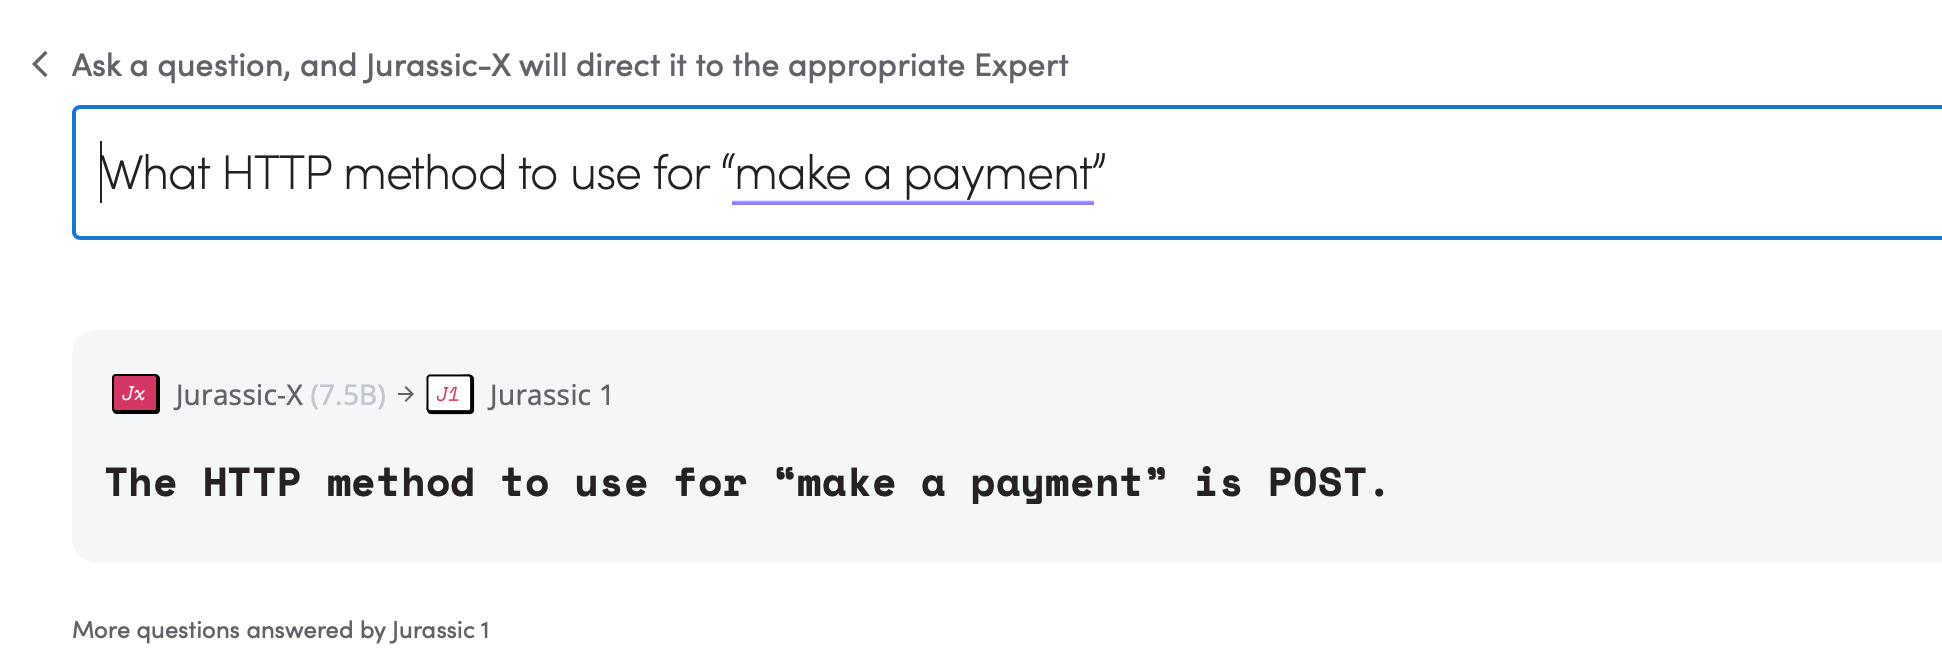 Screenshot of Jurassic-X prompt: "What HTTP method to use for 'make payment'" and an answer suggesting to use POST method